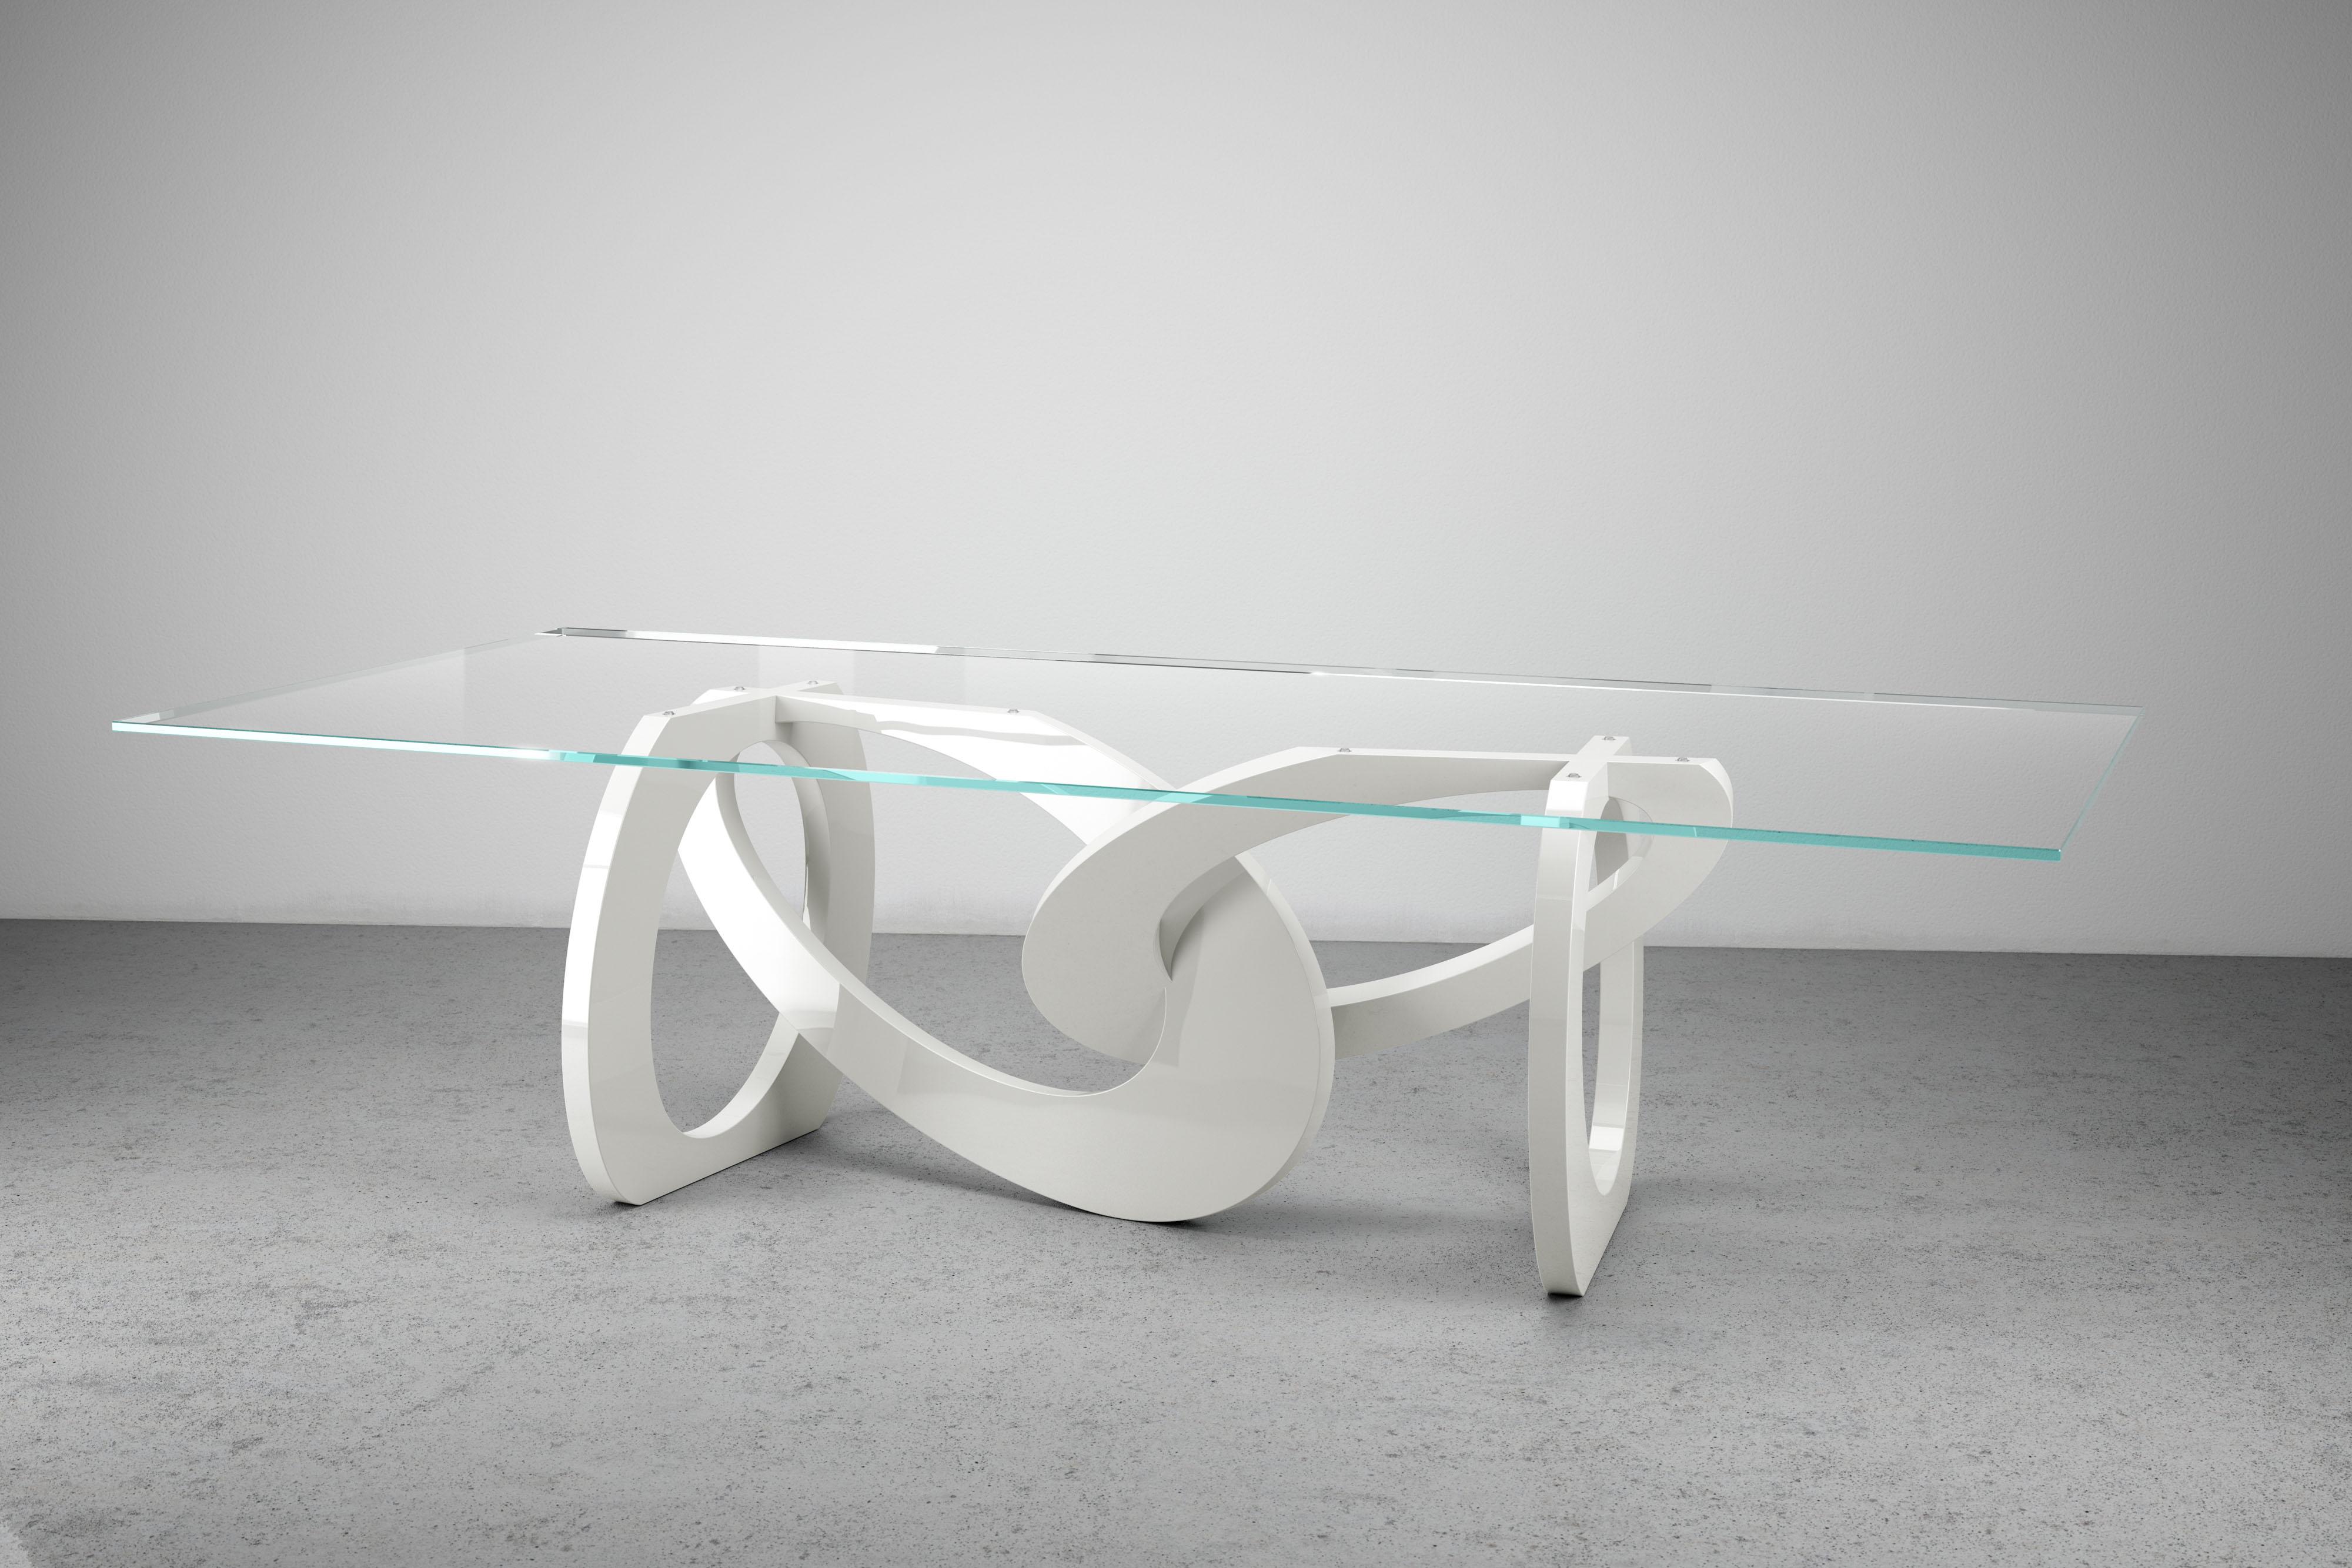 The dining-table 'Bangles Wood' is the smaller version of the iconic sculptural table 'Bangles' chosen by Ridley Scott for his film 'HOUSE OF GUCCI' starring Al Pacino, Lady Gaga, Adam Driver...
'Bangles Wood' has an extra-clear crystal glass top